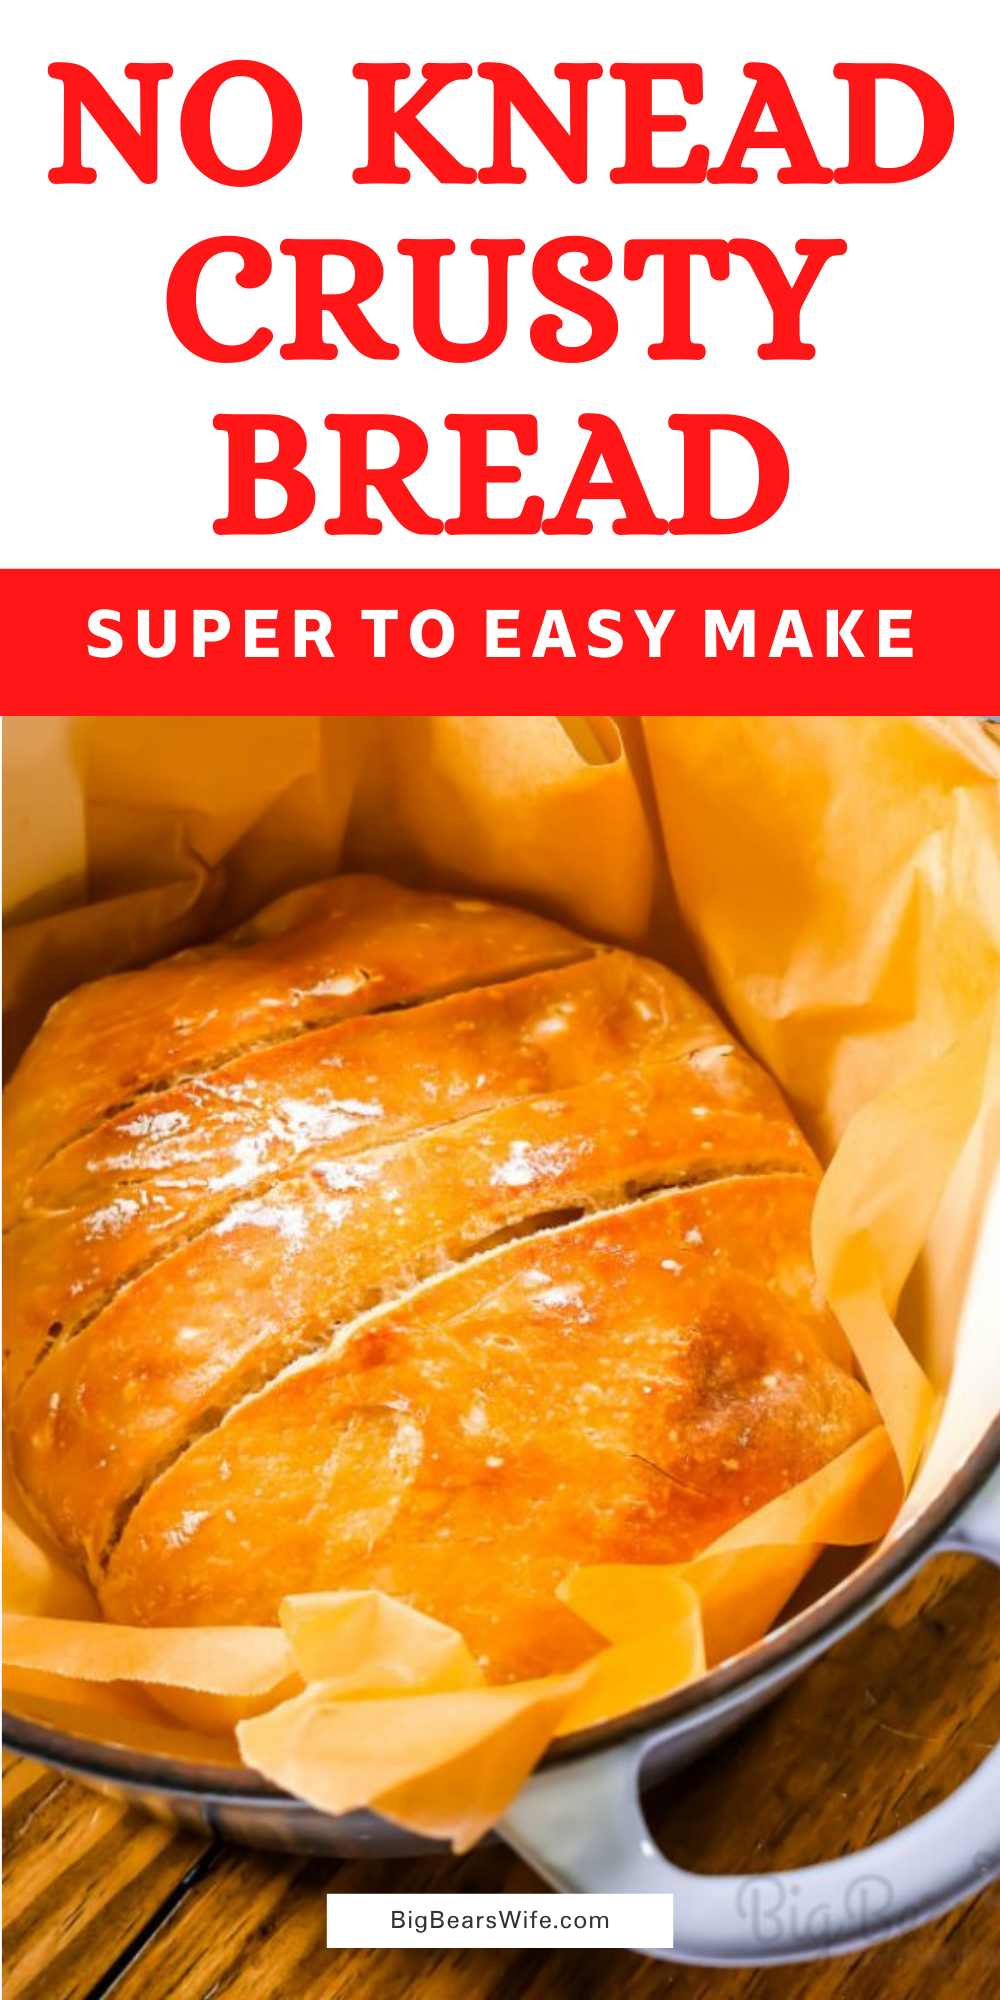 Ready to learn how to make the easiest No Knead Crusty Bread at home? I’ve got step by step photos and directions to teach you how to bake it in your own kitchen! via @bigbearswife